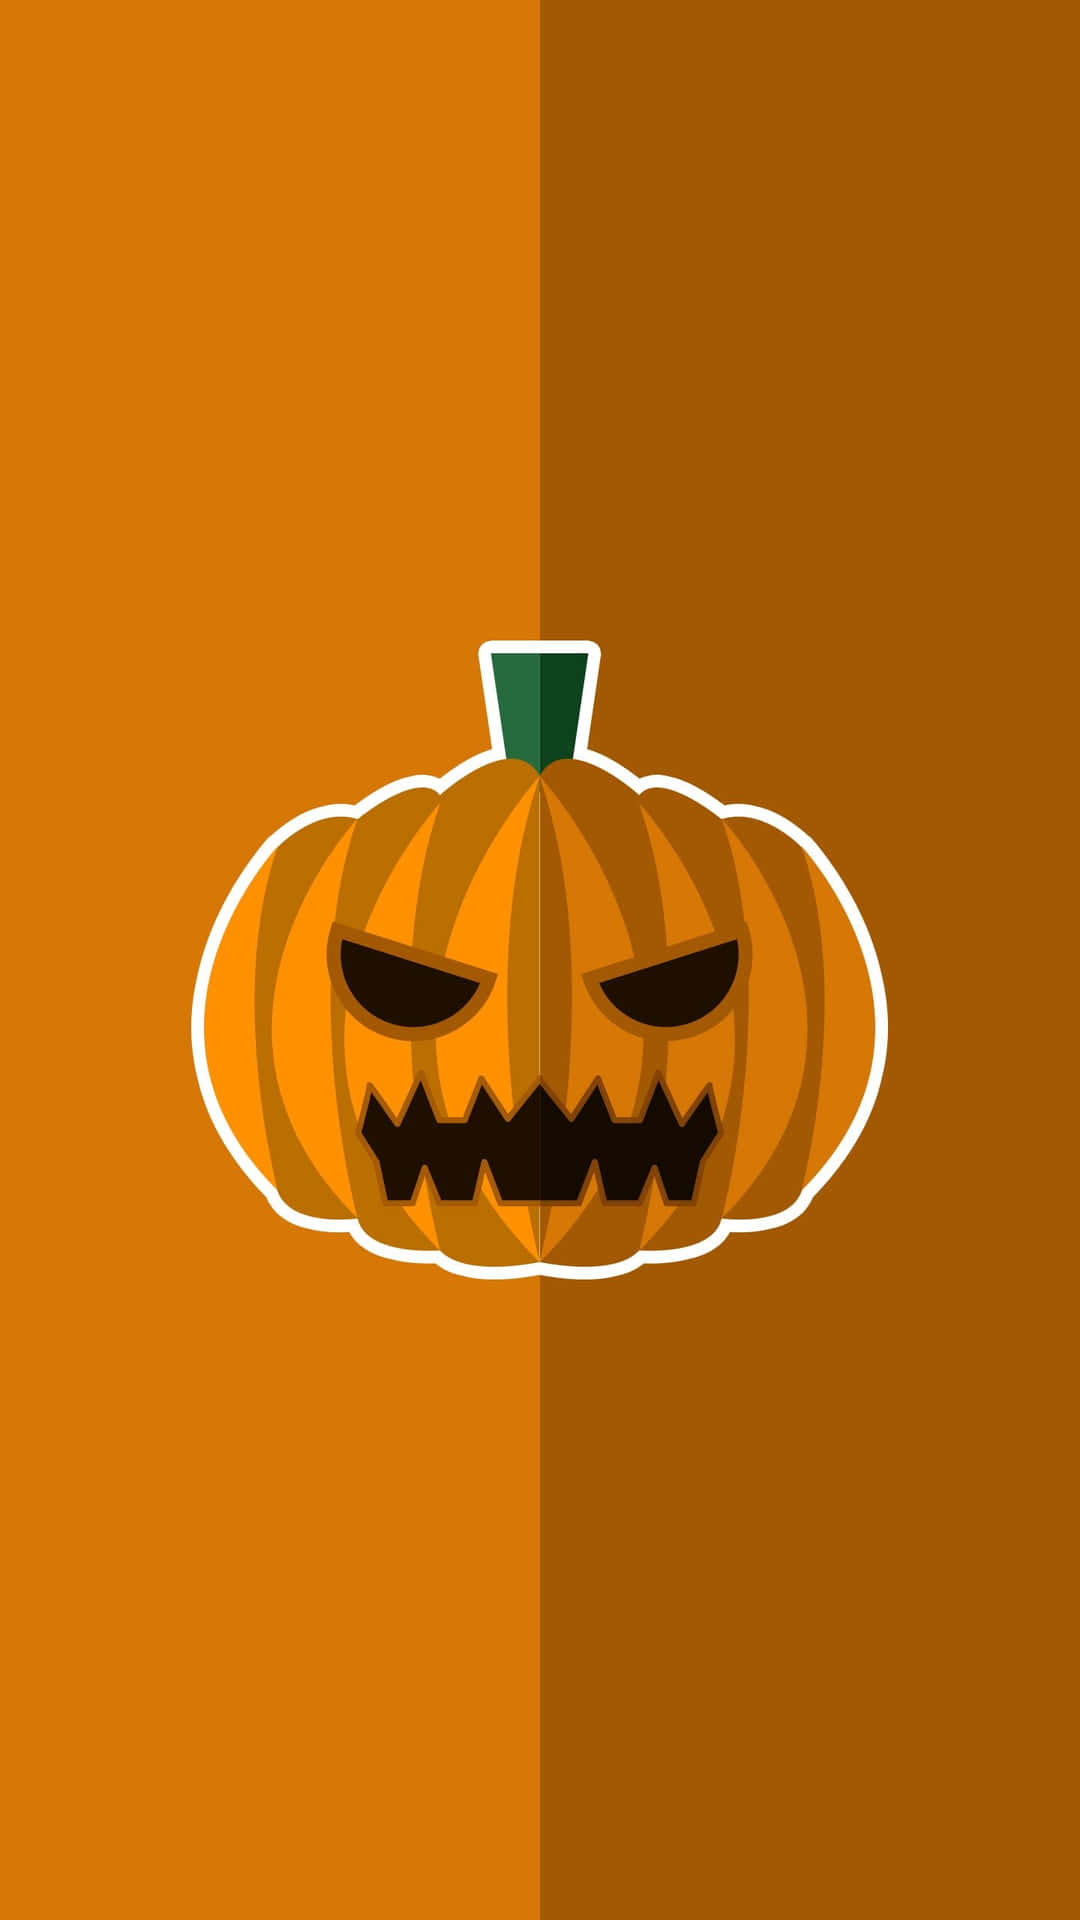 Get In The Spooky Spirit With This Eerie Fall Halloween Iphone Wallpaper! Wallpaper